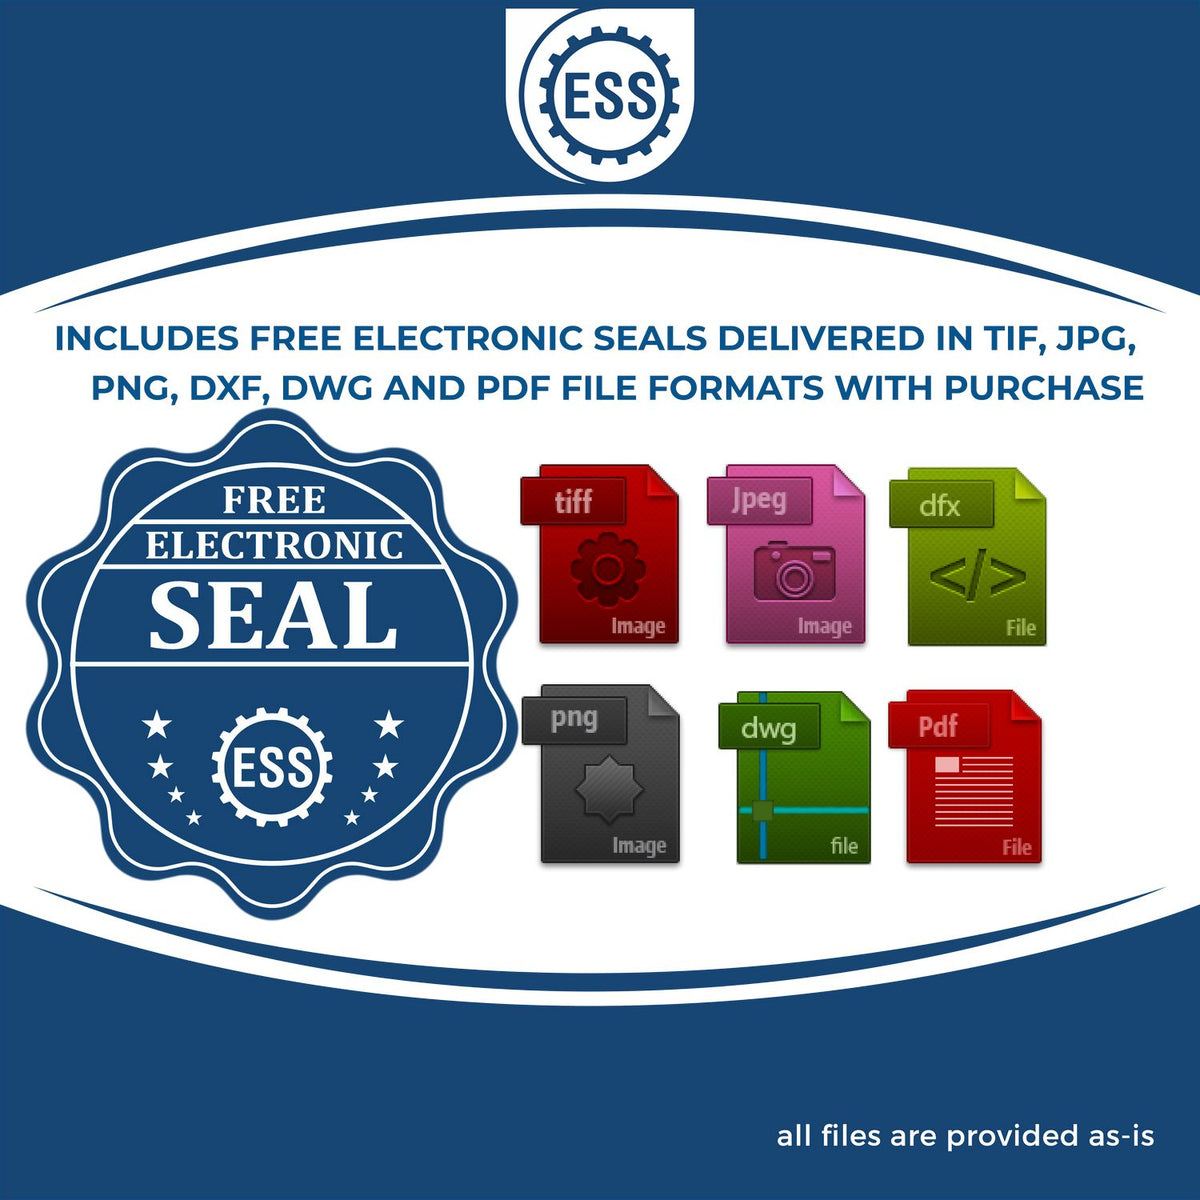 An infographic for the free electronic seal for the Wooden Handle Rhode Island Rectangular Notary Public Stamp illustrating the different file type icons such as DXF, DWG, TIF, JPG and PNG.